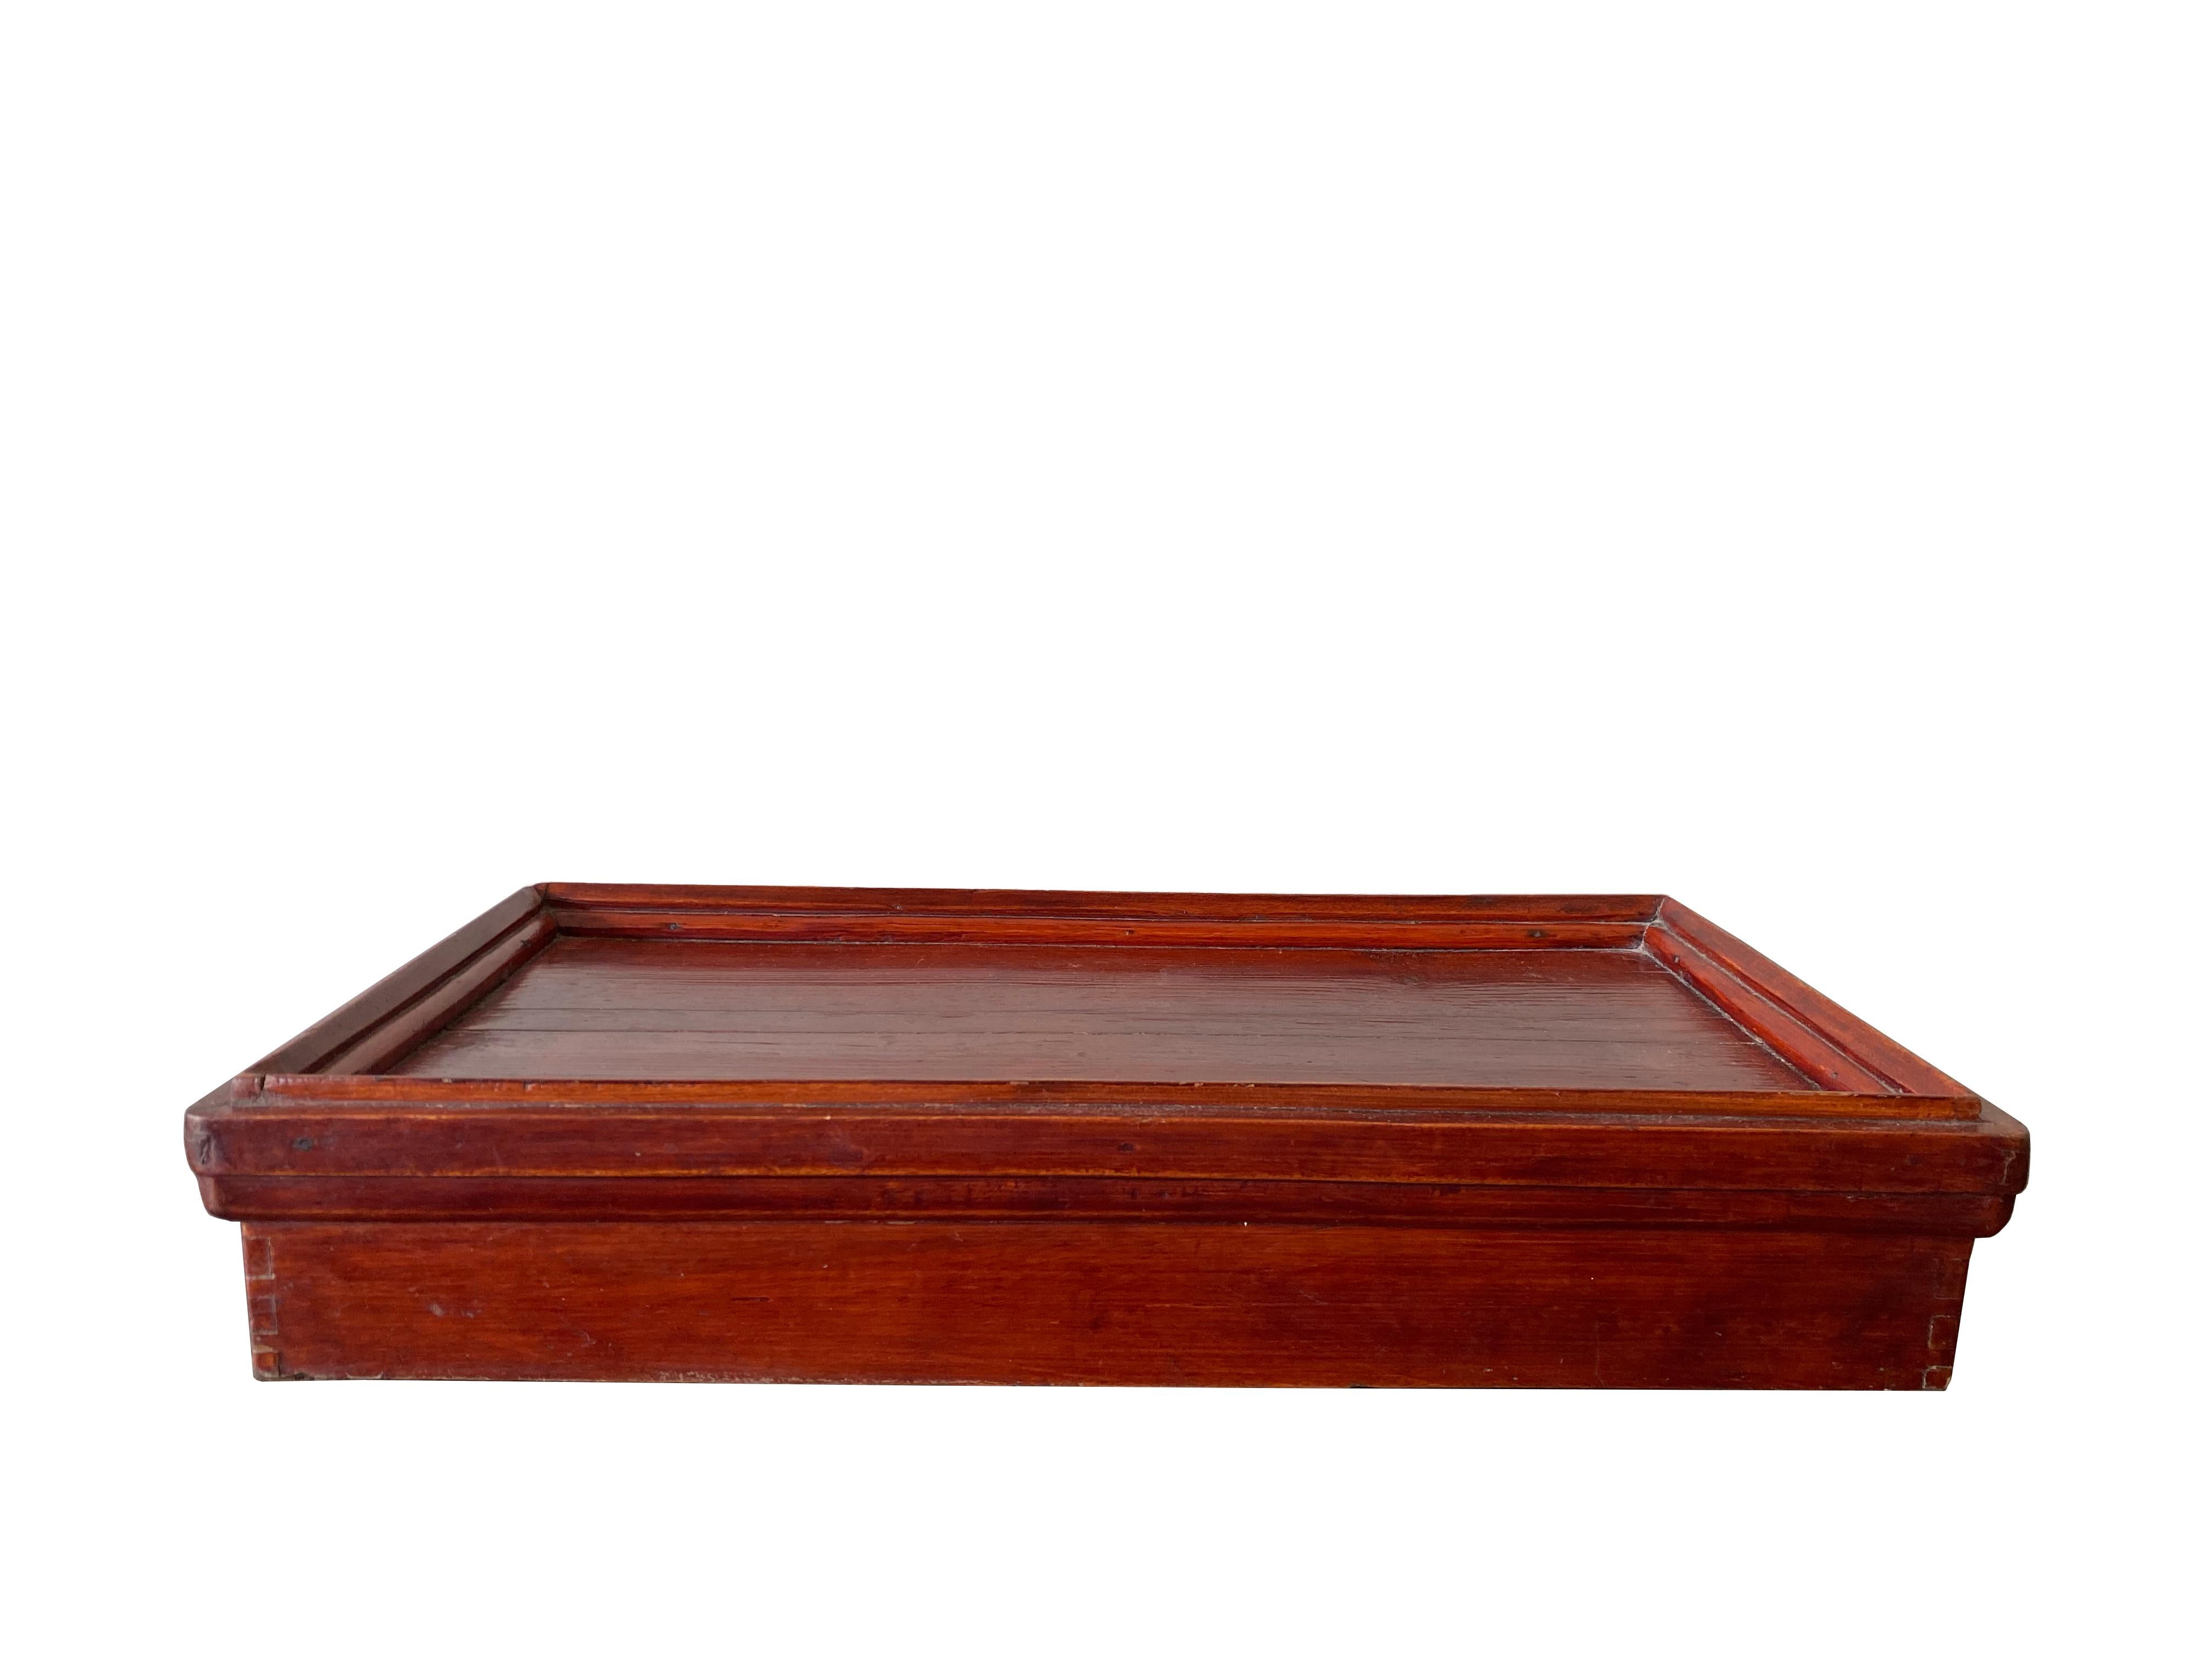 Chinese Burgundy Lacquered Tray with Character Engravings, Mid-20th Century In Good Condition For Sale In Jimbaran, Bali